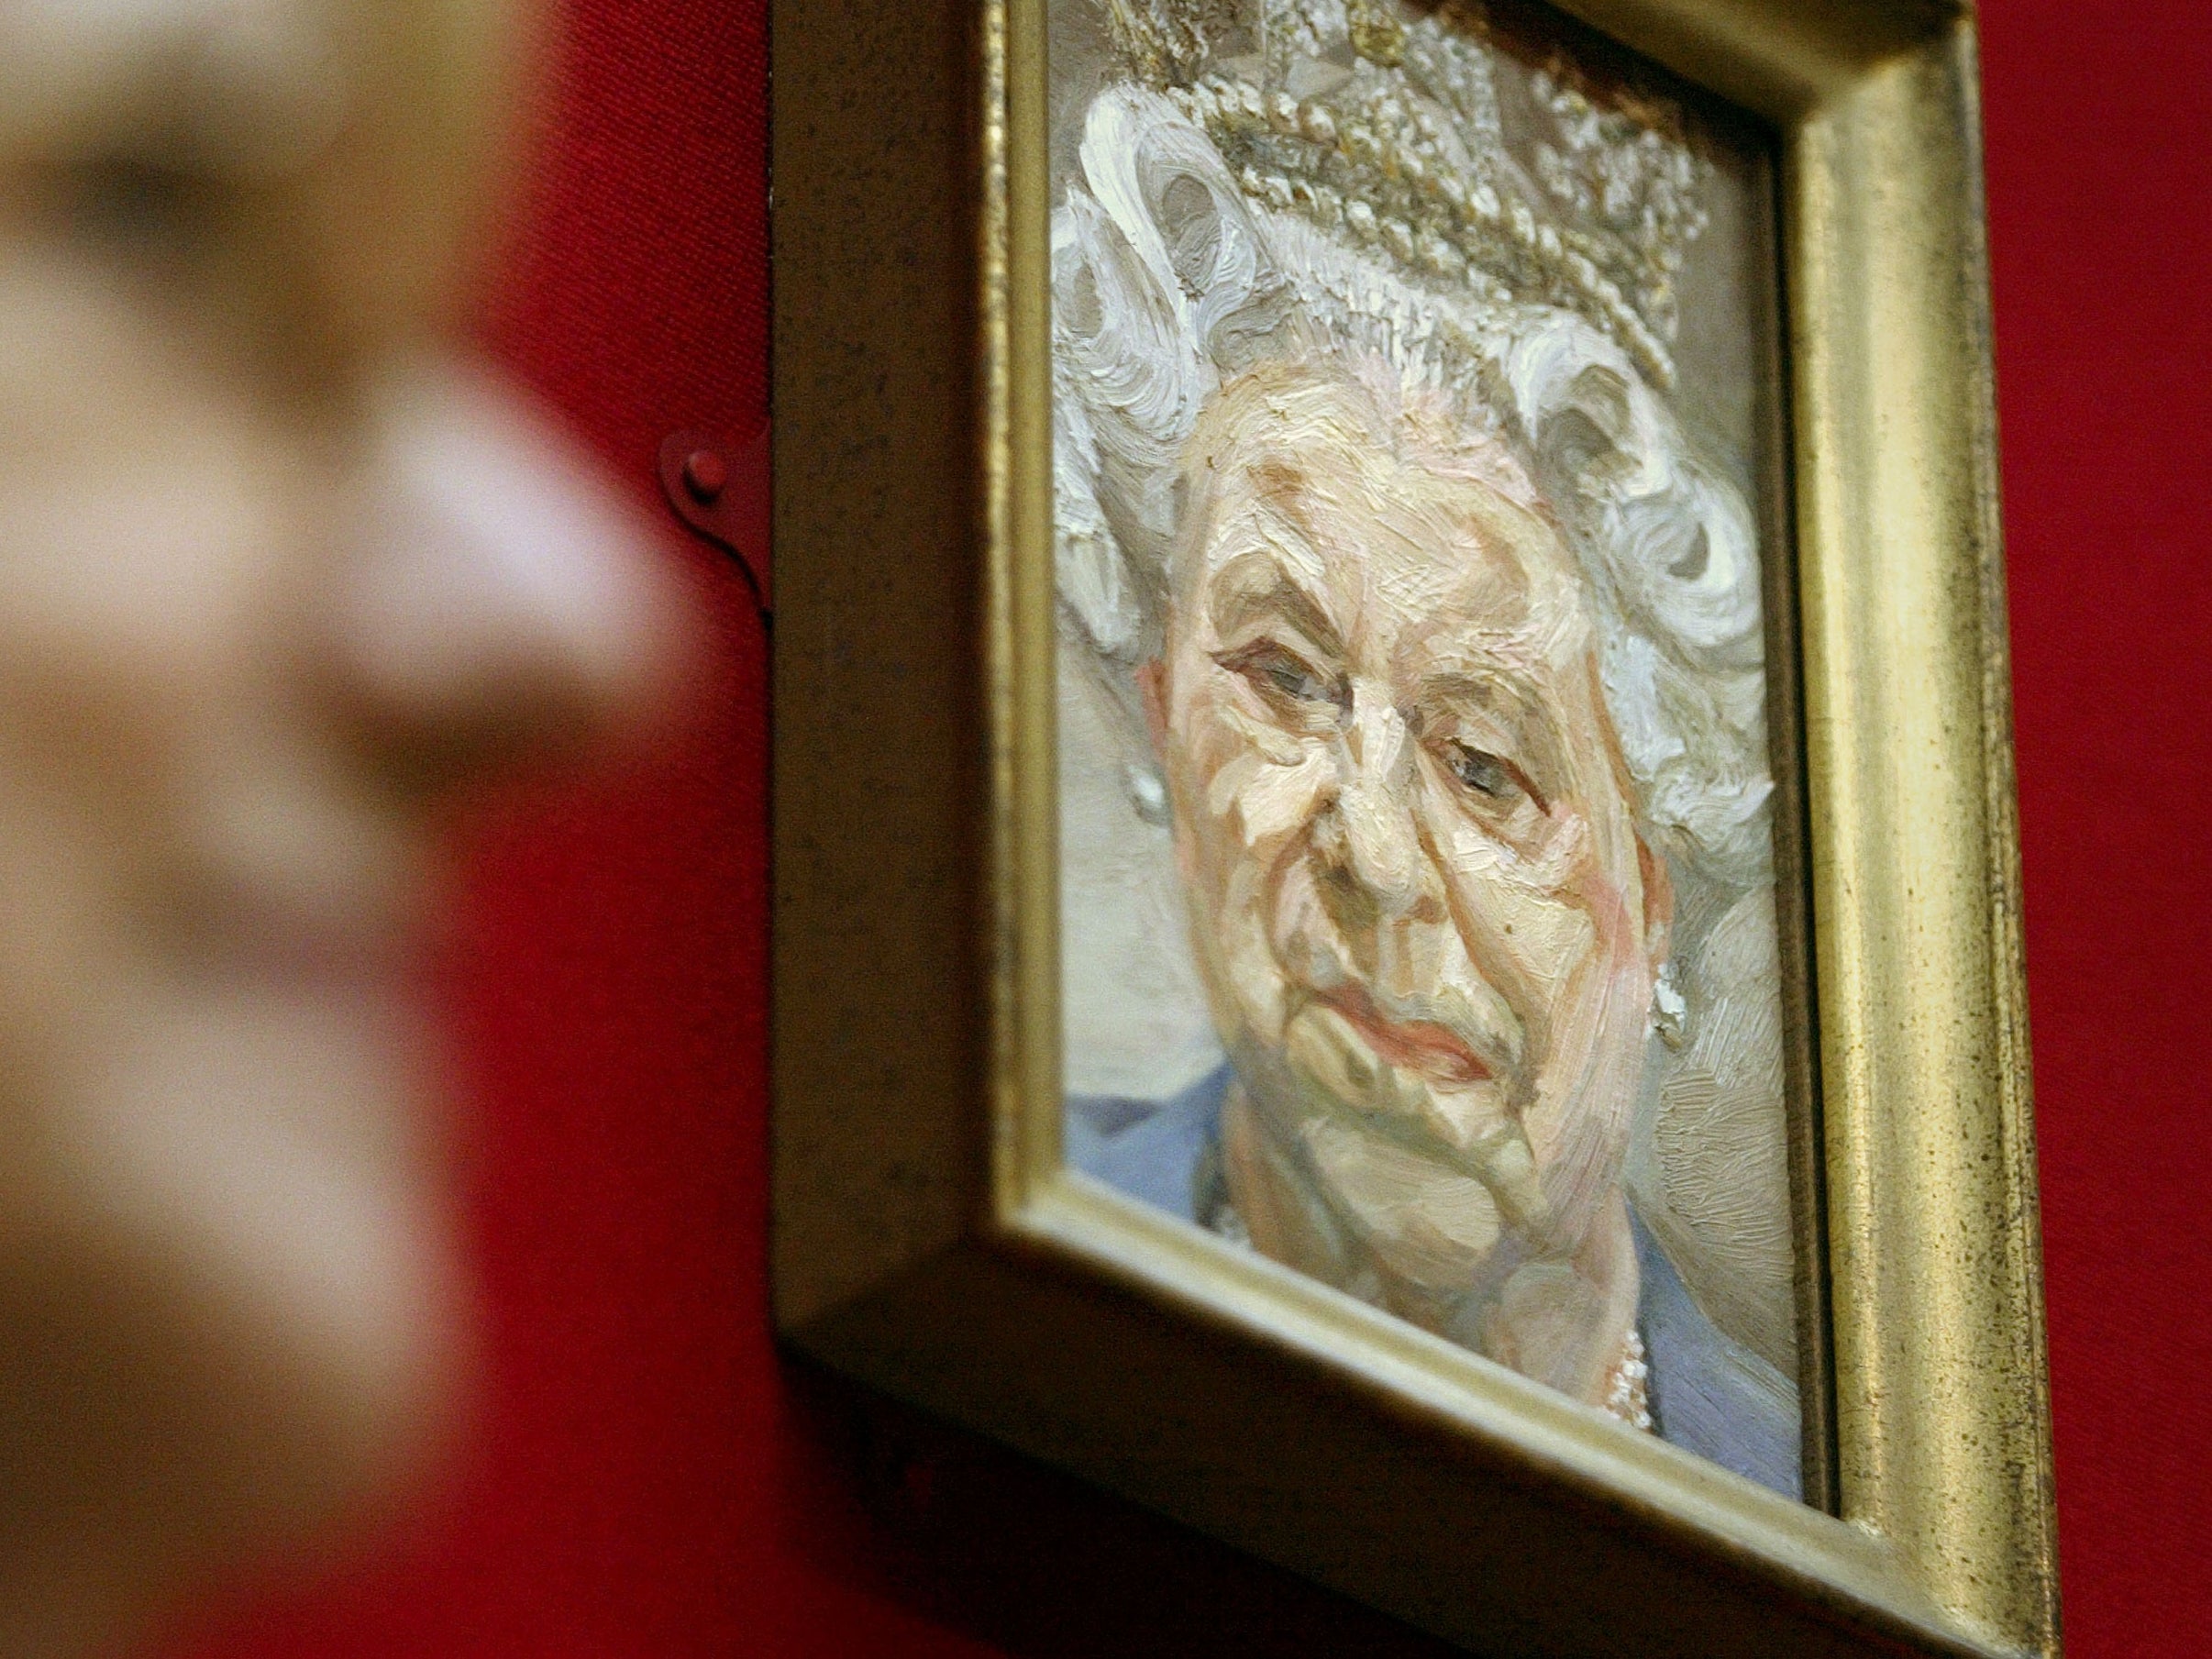 A gallery visitor walks by a newly unveiled portrait of the queen by British artist Lucien Freud at the inaugural opening of the Royal Collection at the Queen’s Gallery in Buckingham Palace in 2002